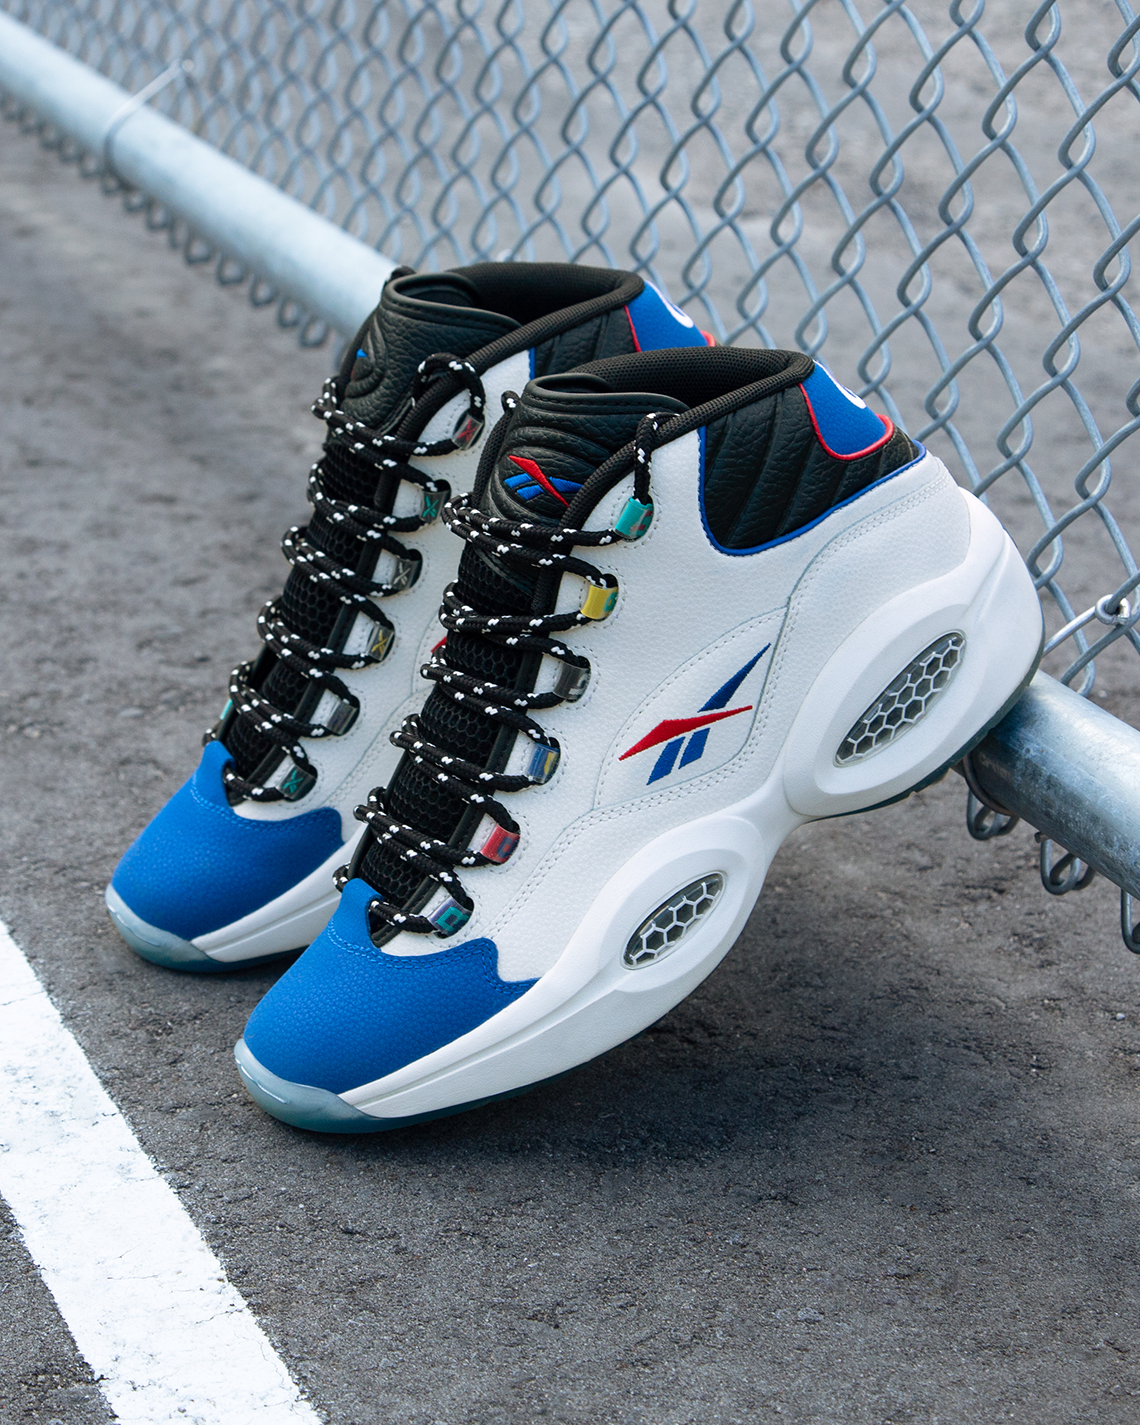 Sneakersnstuff x Reebok Question Shoe About Nothing